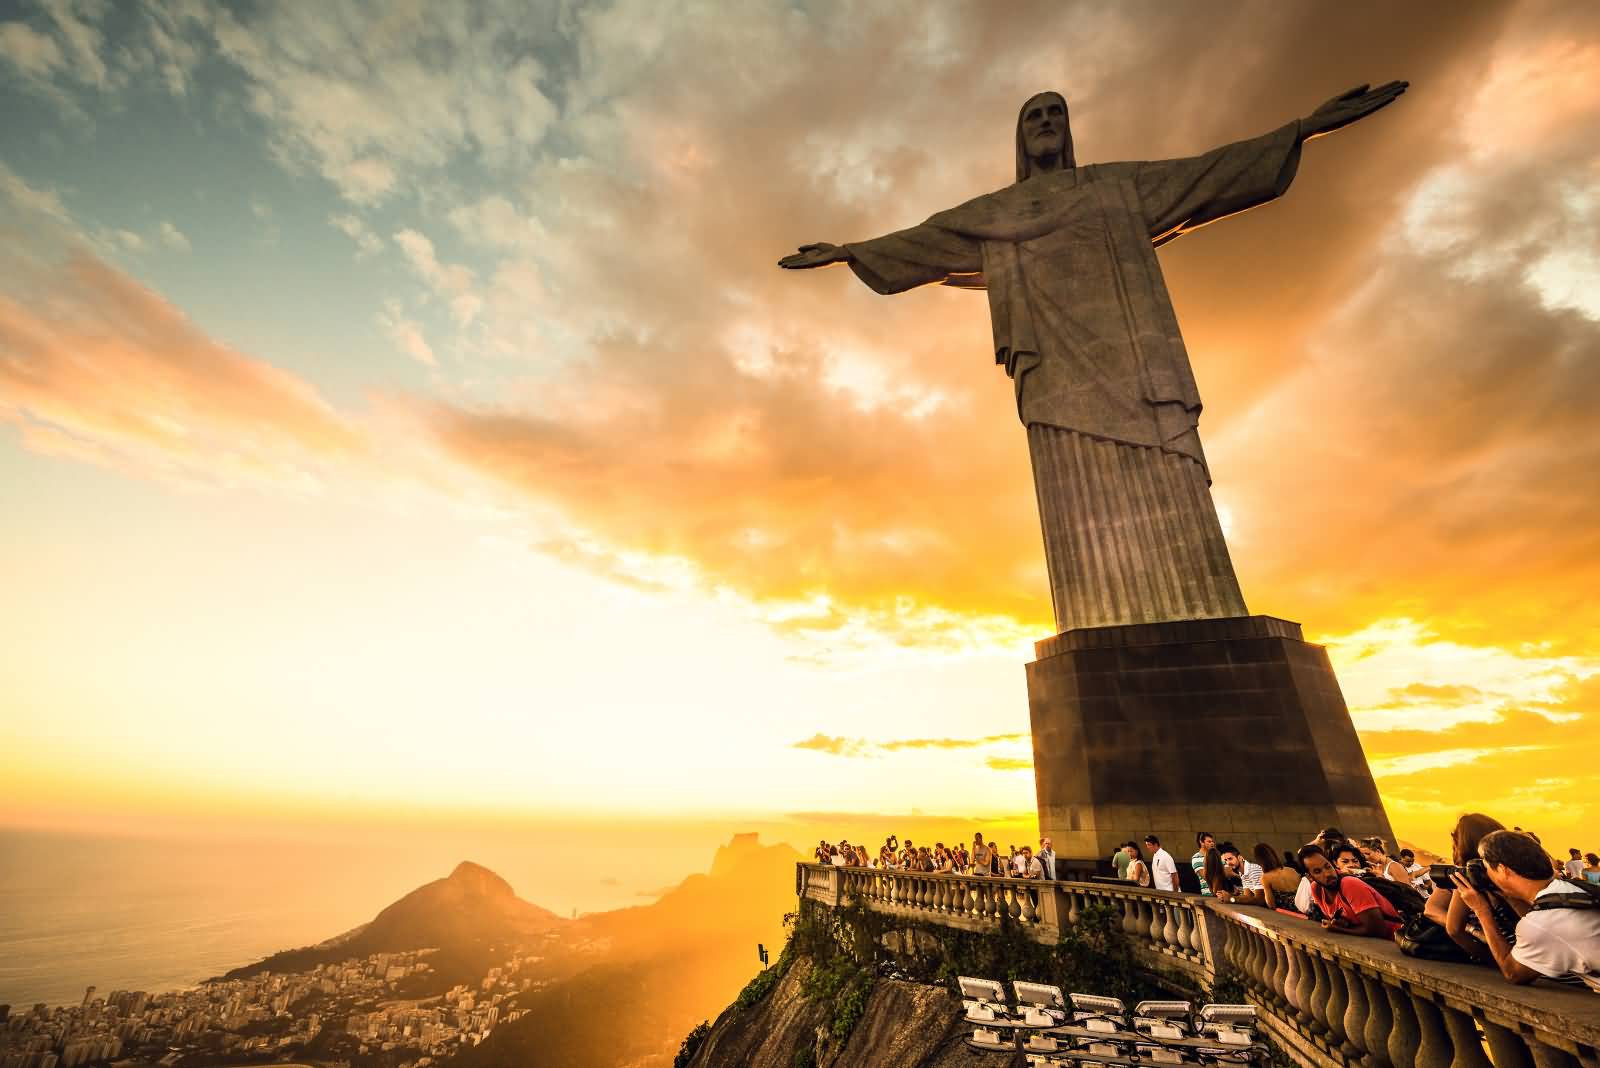 27 Beautiful Sunset View Pictures Of Christ the Redeemer